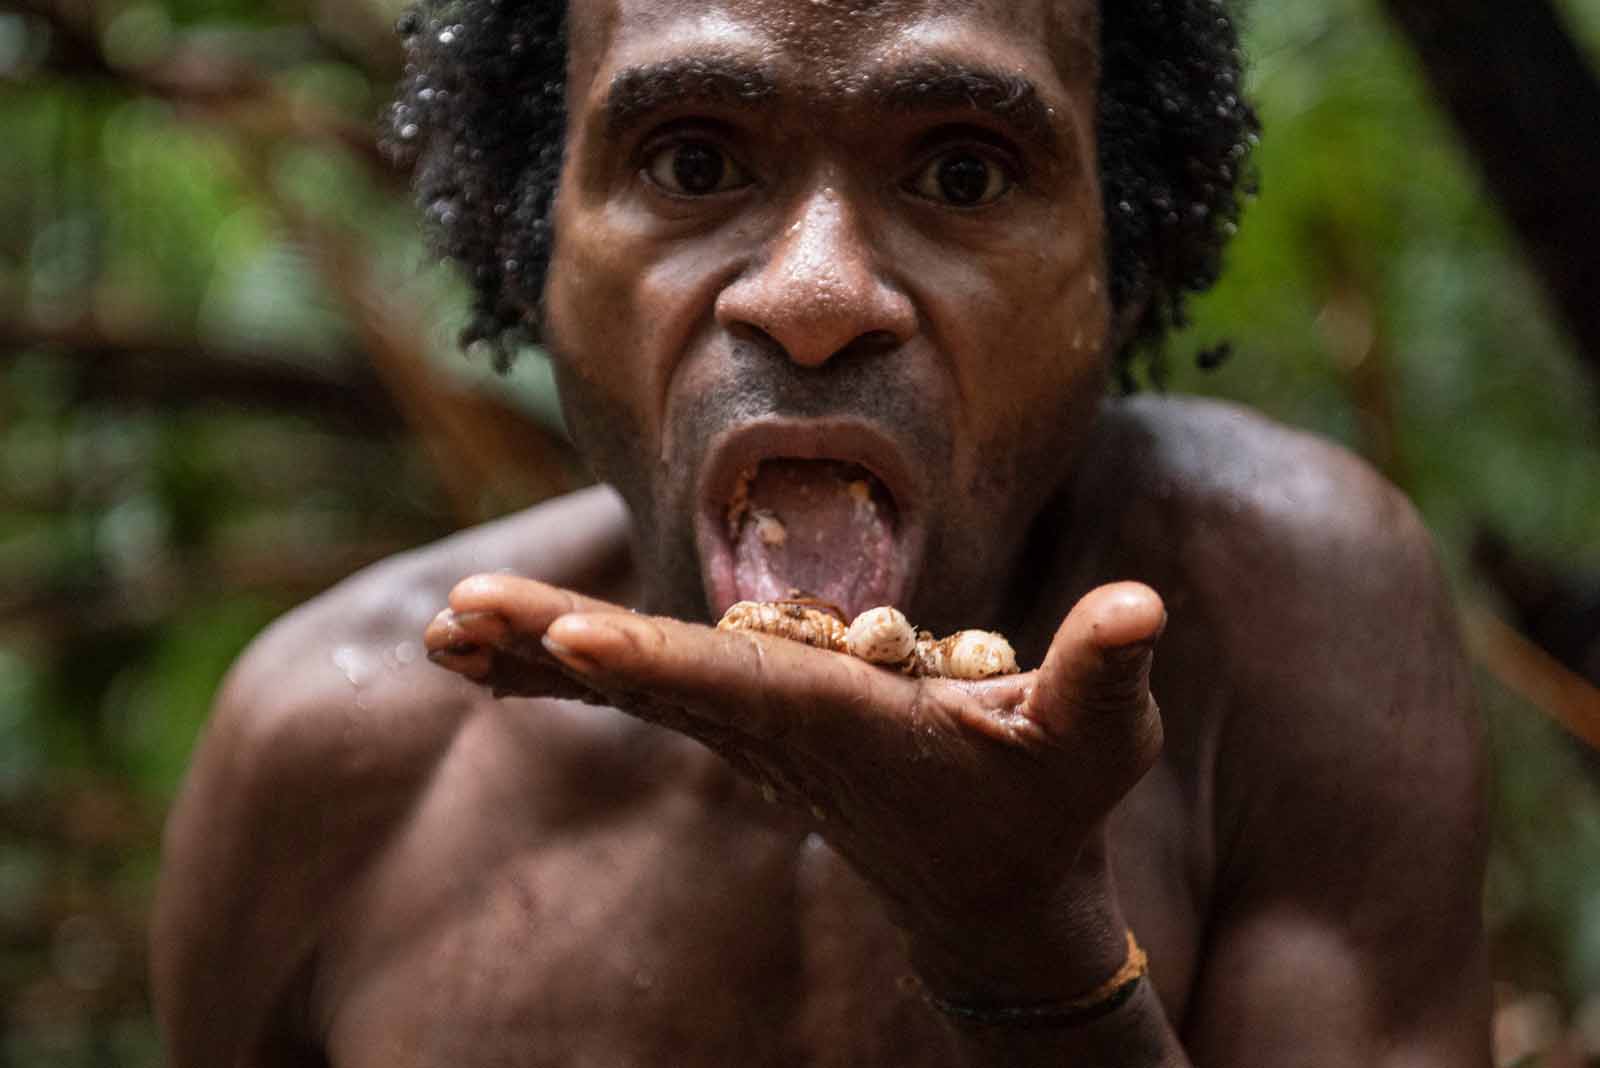 Did you know there are full tribes of cannibals living today? Film Daily